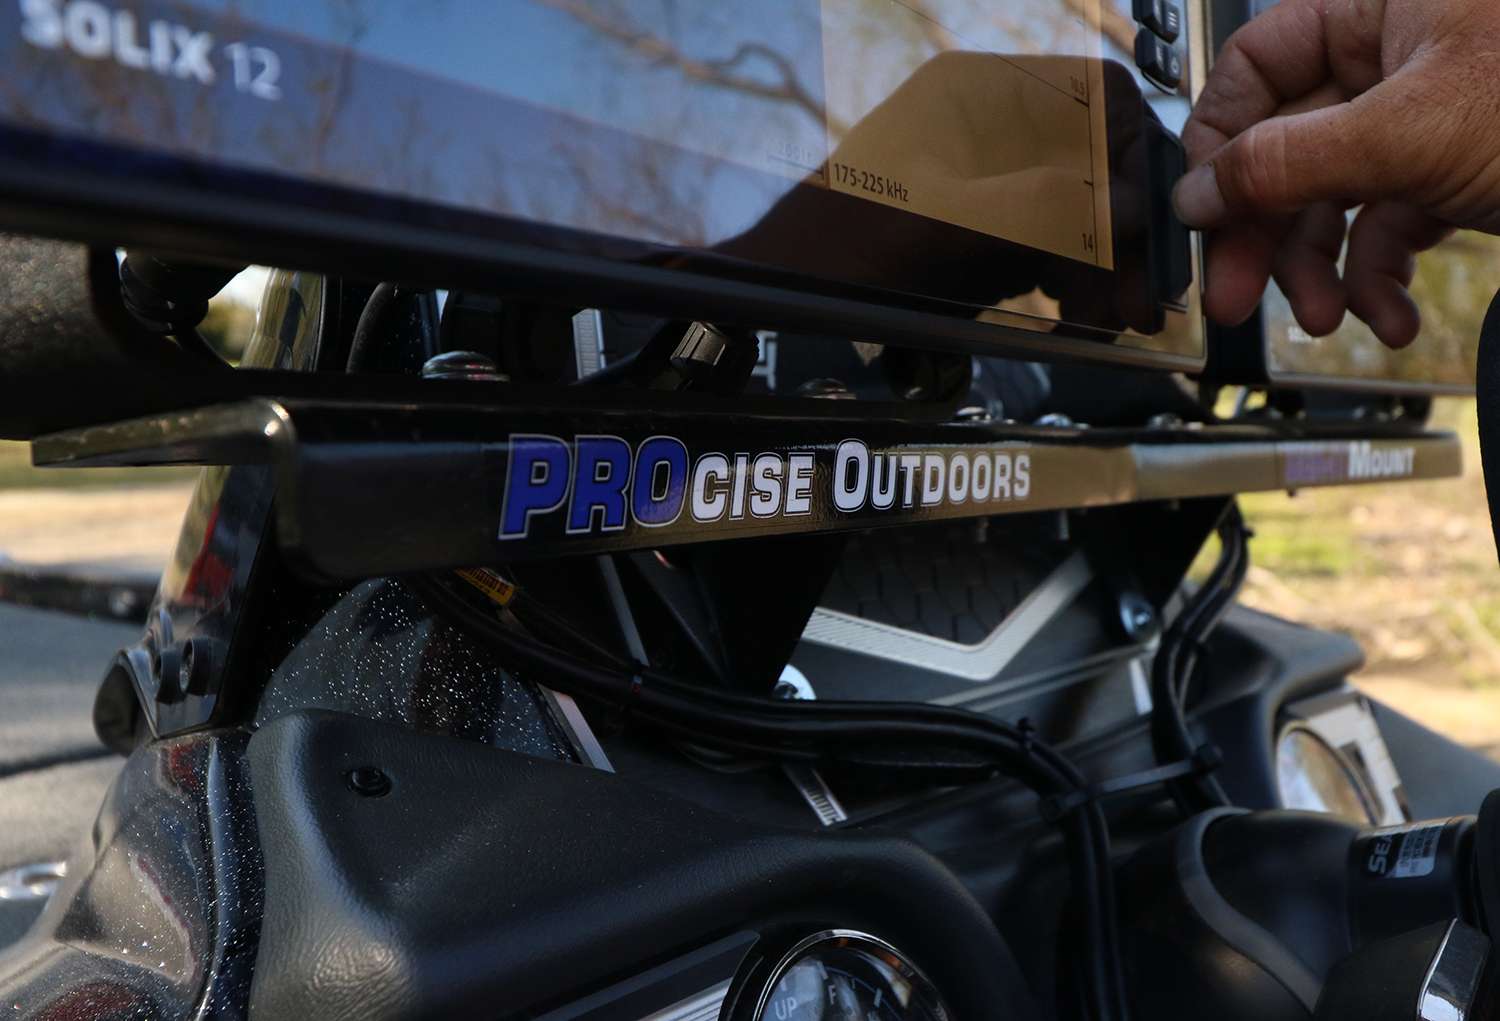 The dash-mounted Solix units are held by a PROcise Outdoors mount. They don't even budge.